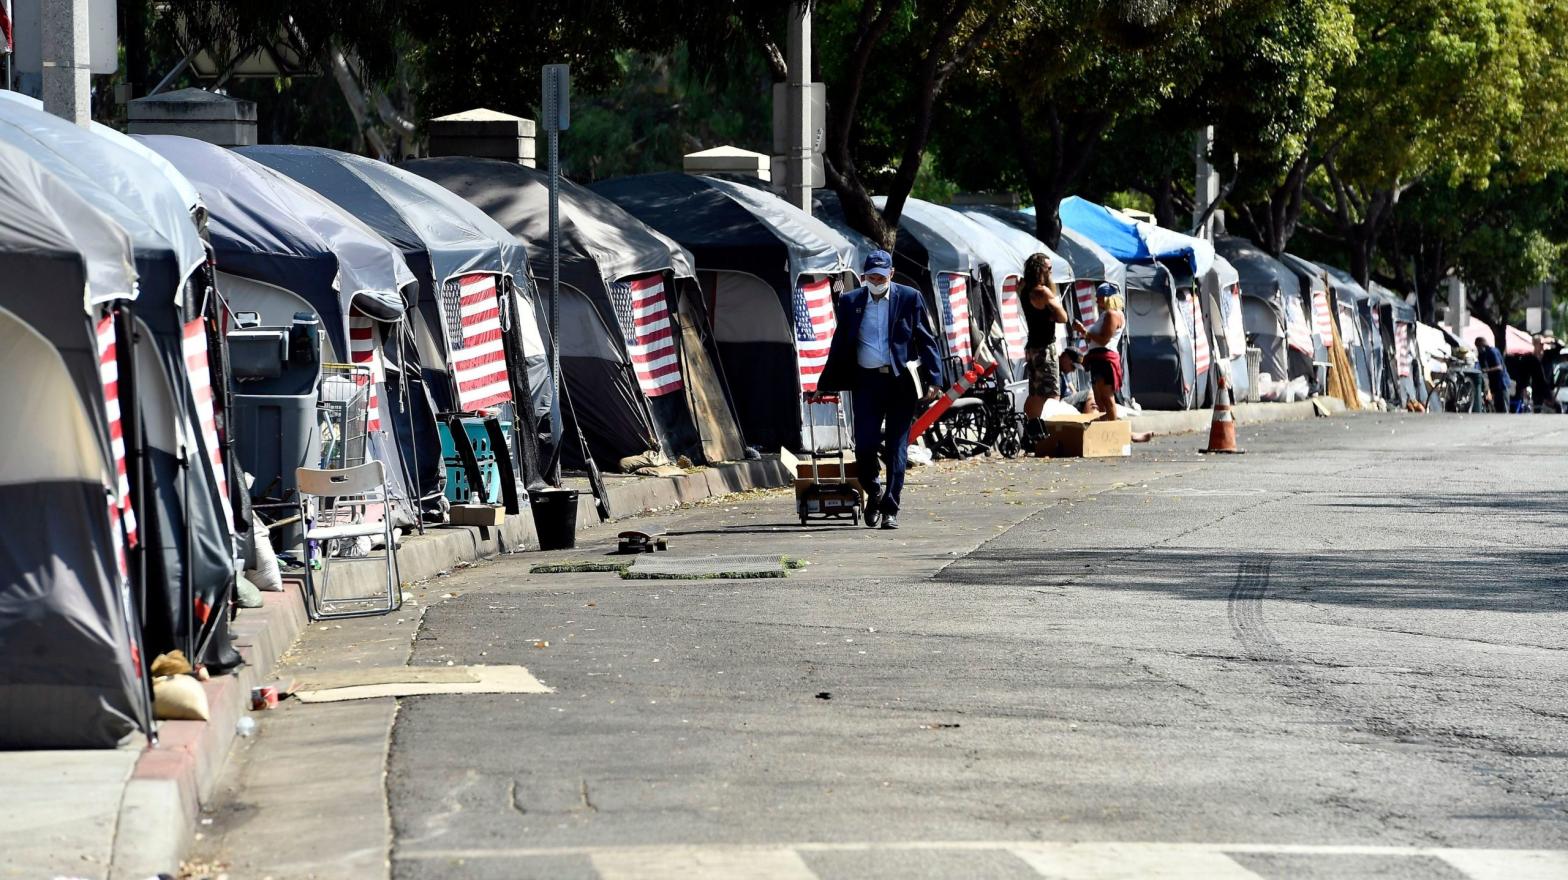 Homeless U.S. veteran tents near the VA West Los Angeles Healthcare Campus Japanese Garden on September 24, 2020 in Los Angeles, California.  (Photo: Frazer Harrison, Getty Images)